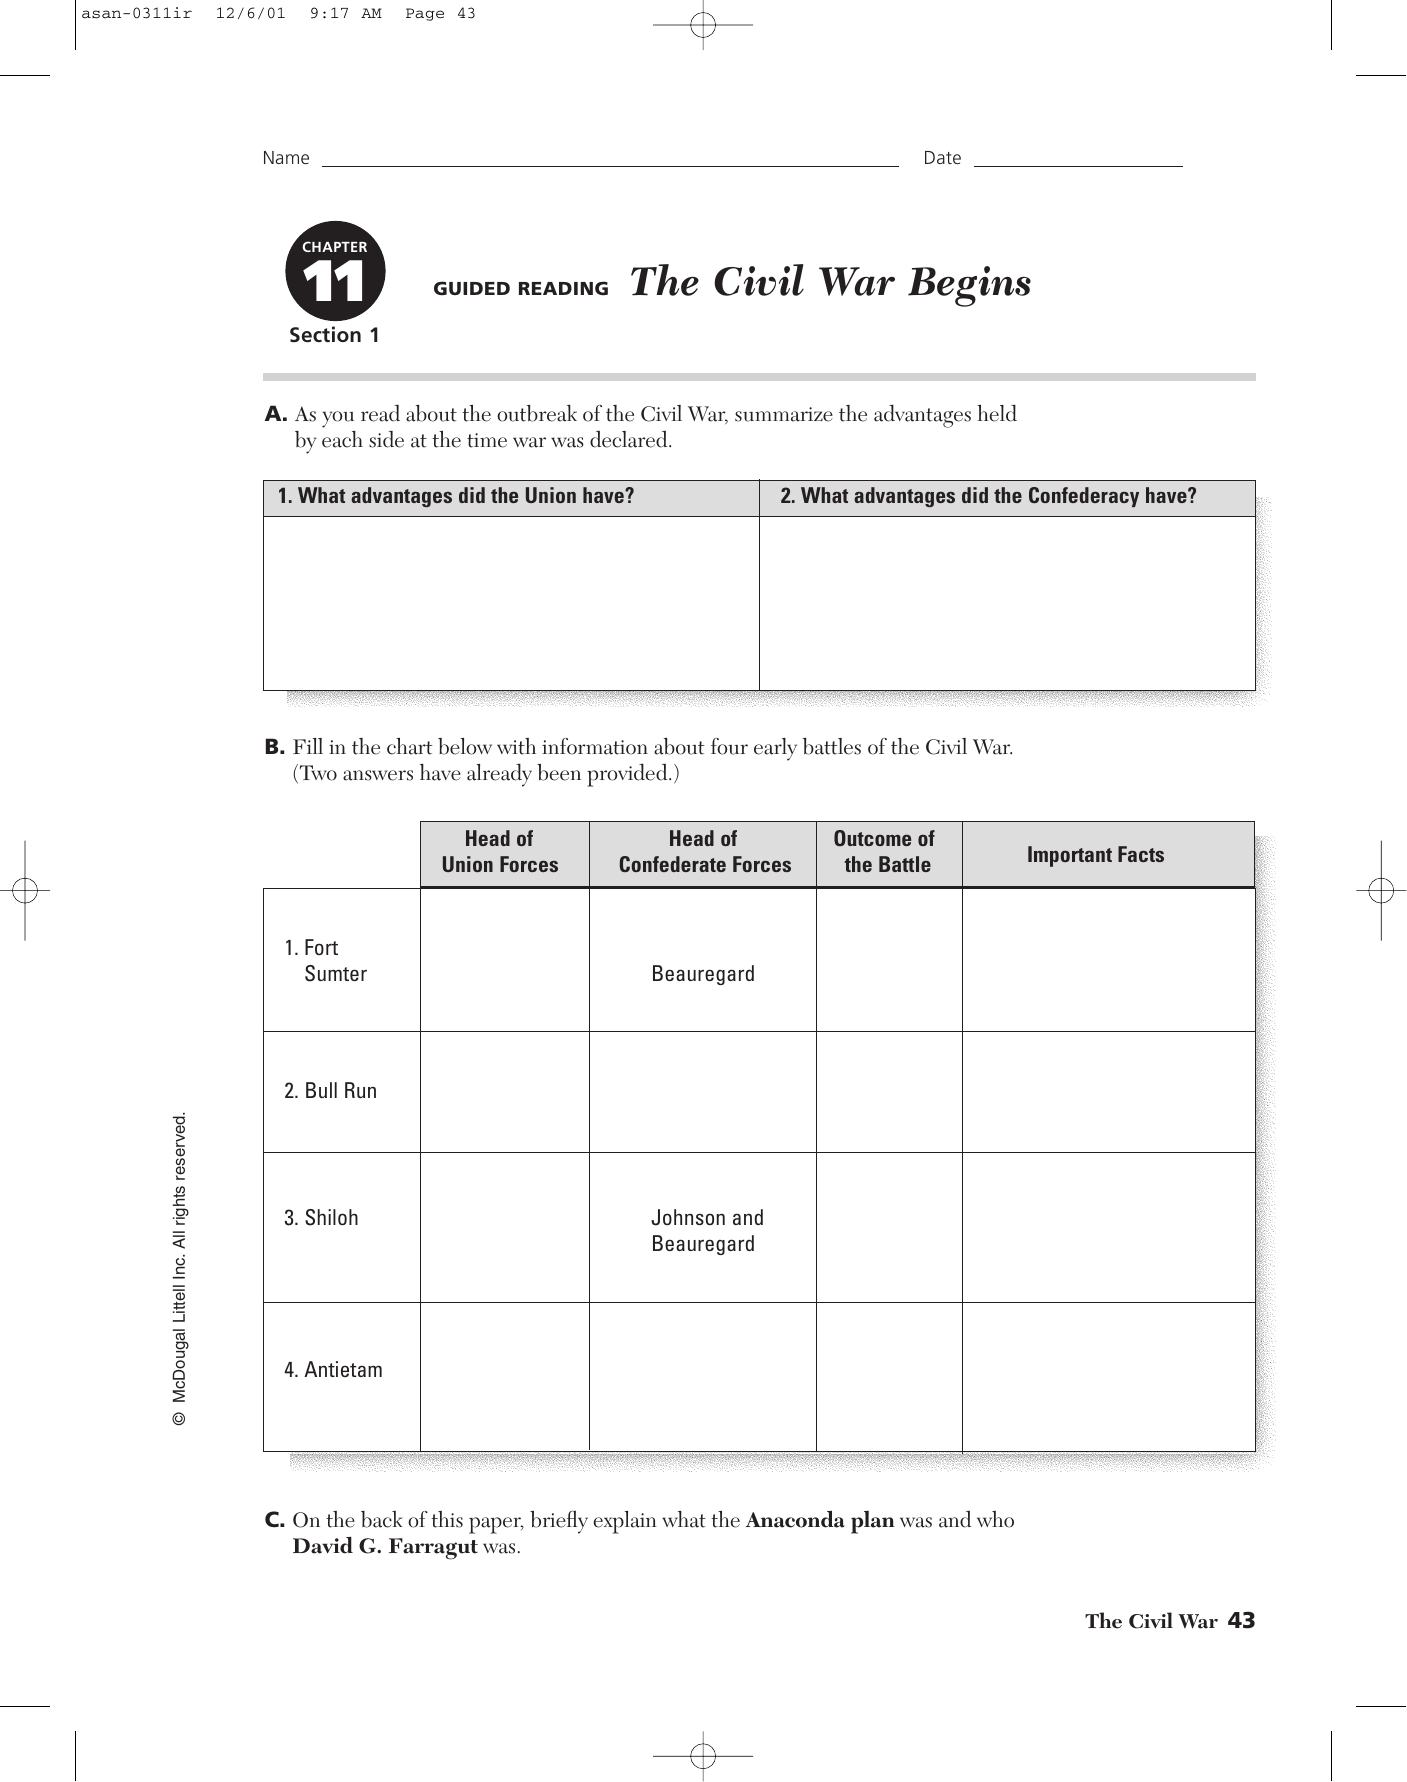 Chapter 11 Guided Reading The Civil R Begins